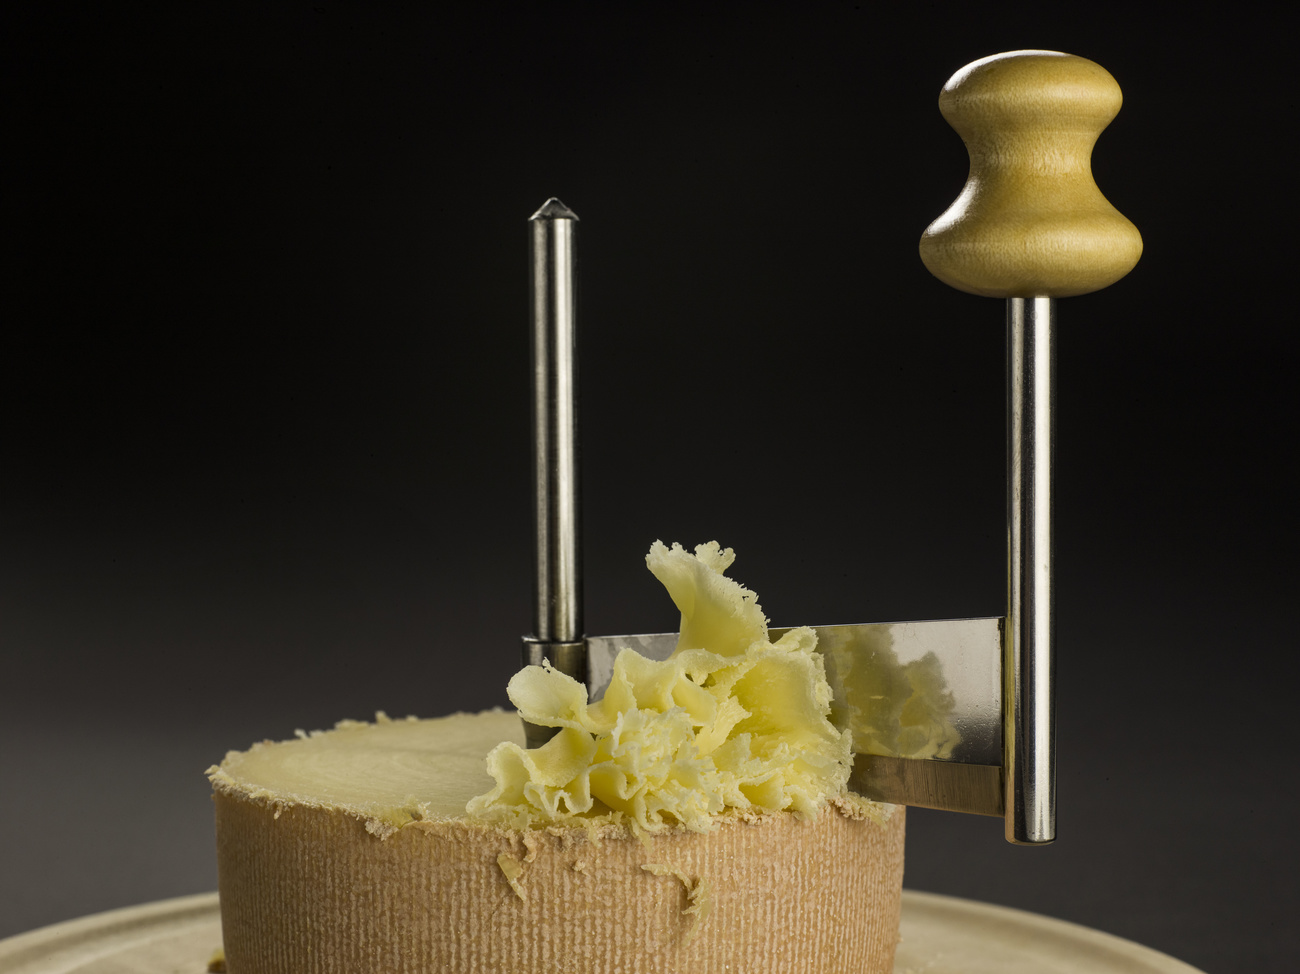 Tête de Moine cheese with rosettes